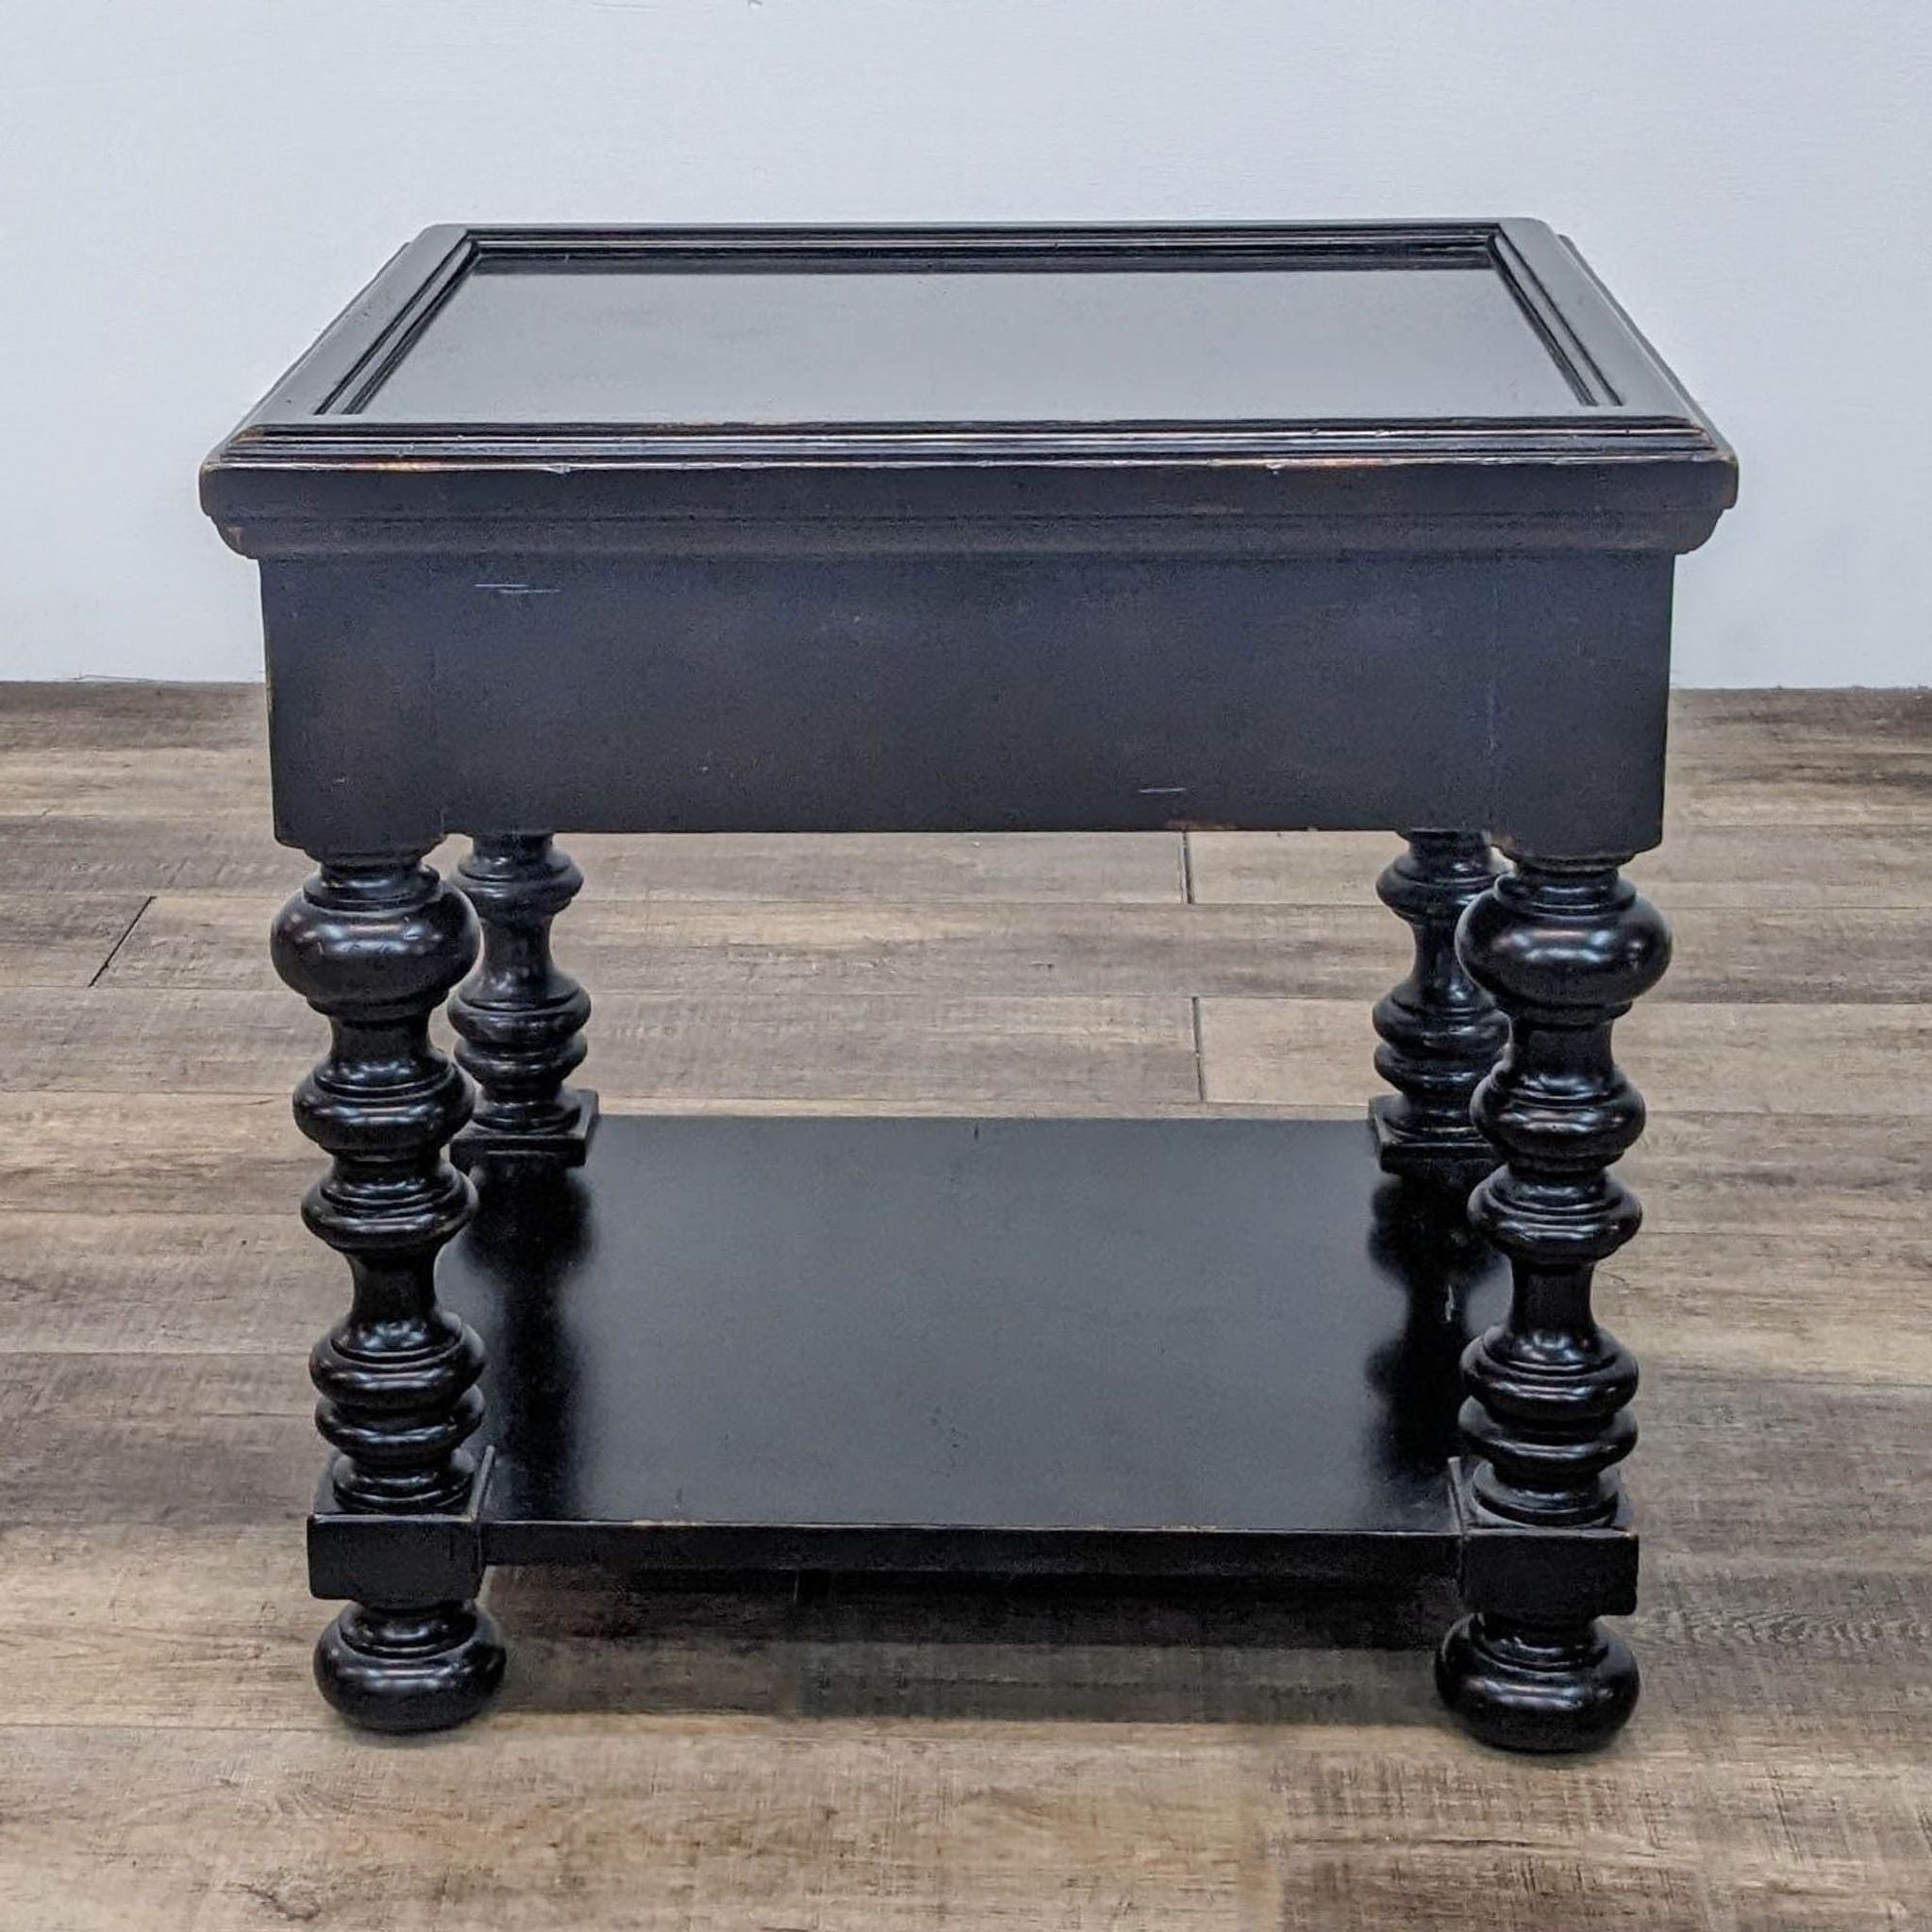 Distressed black end table by Tommy Bahama with a drawer and shelf, detailed spindle legs, and a rustic finish.